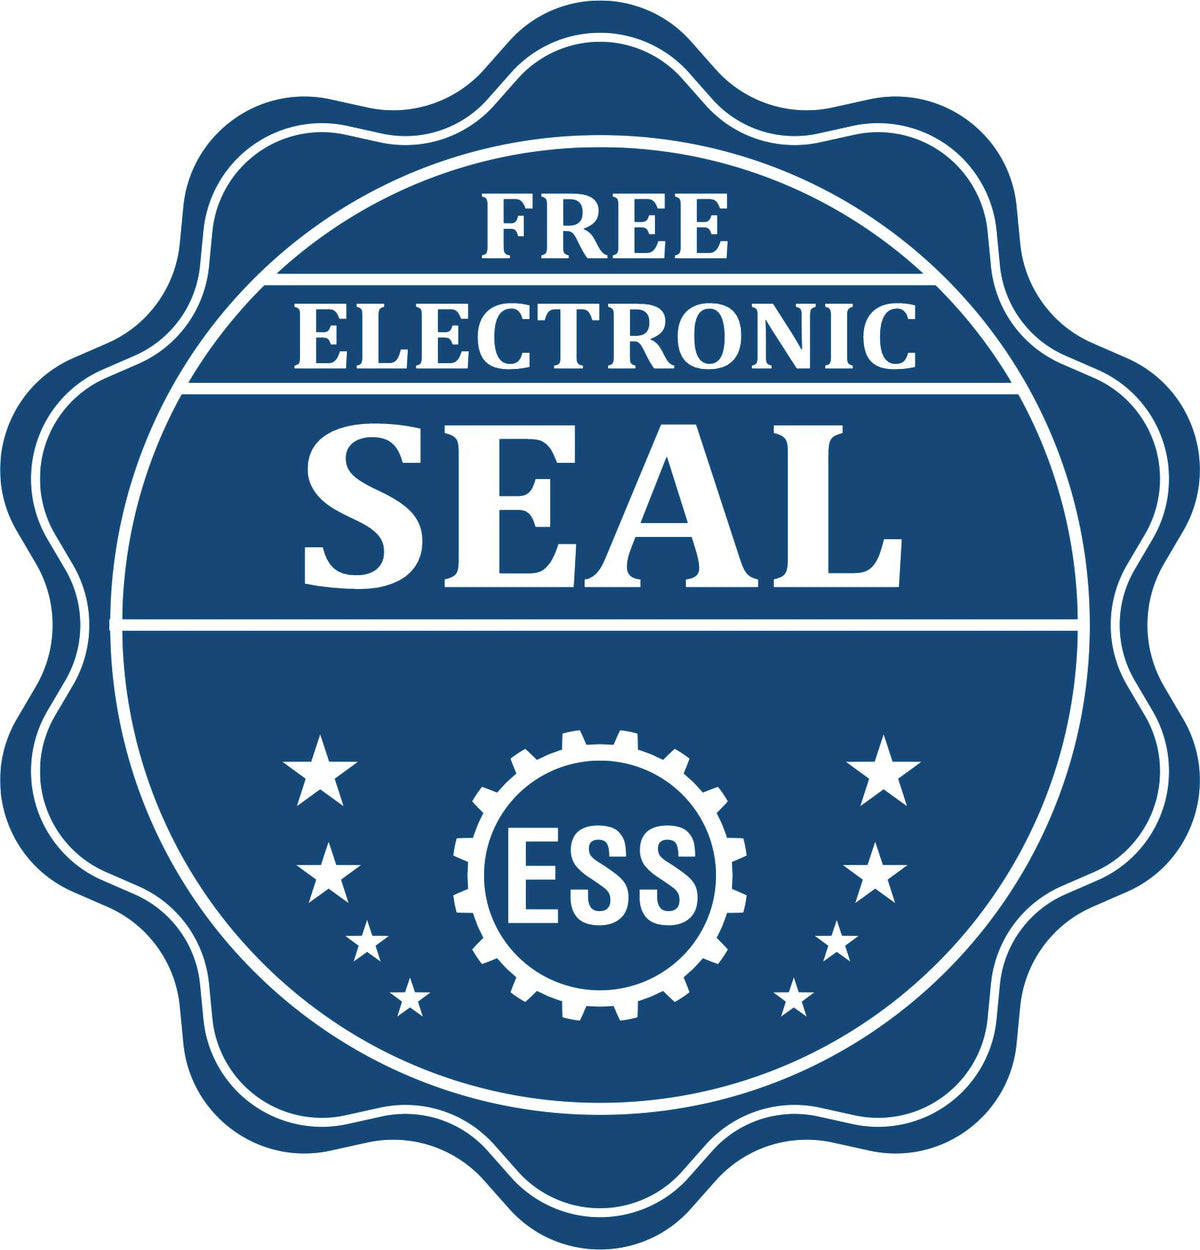 A badge showing a free electronic seal for the Soft Pocket Texas Landscape Architect Embosser with stars and the ESS gear on the emblem.